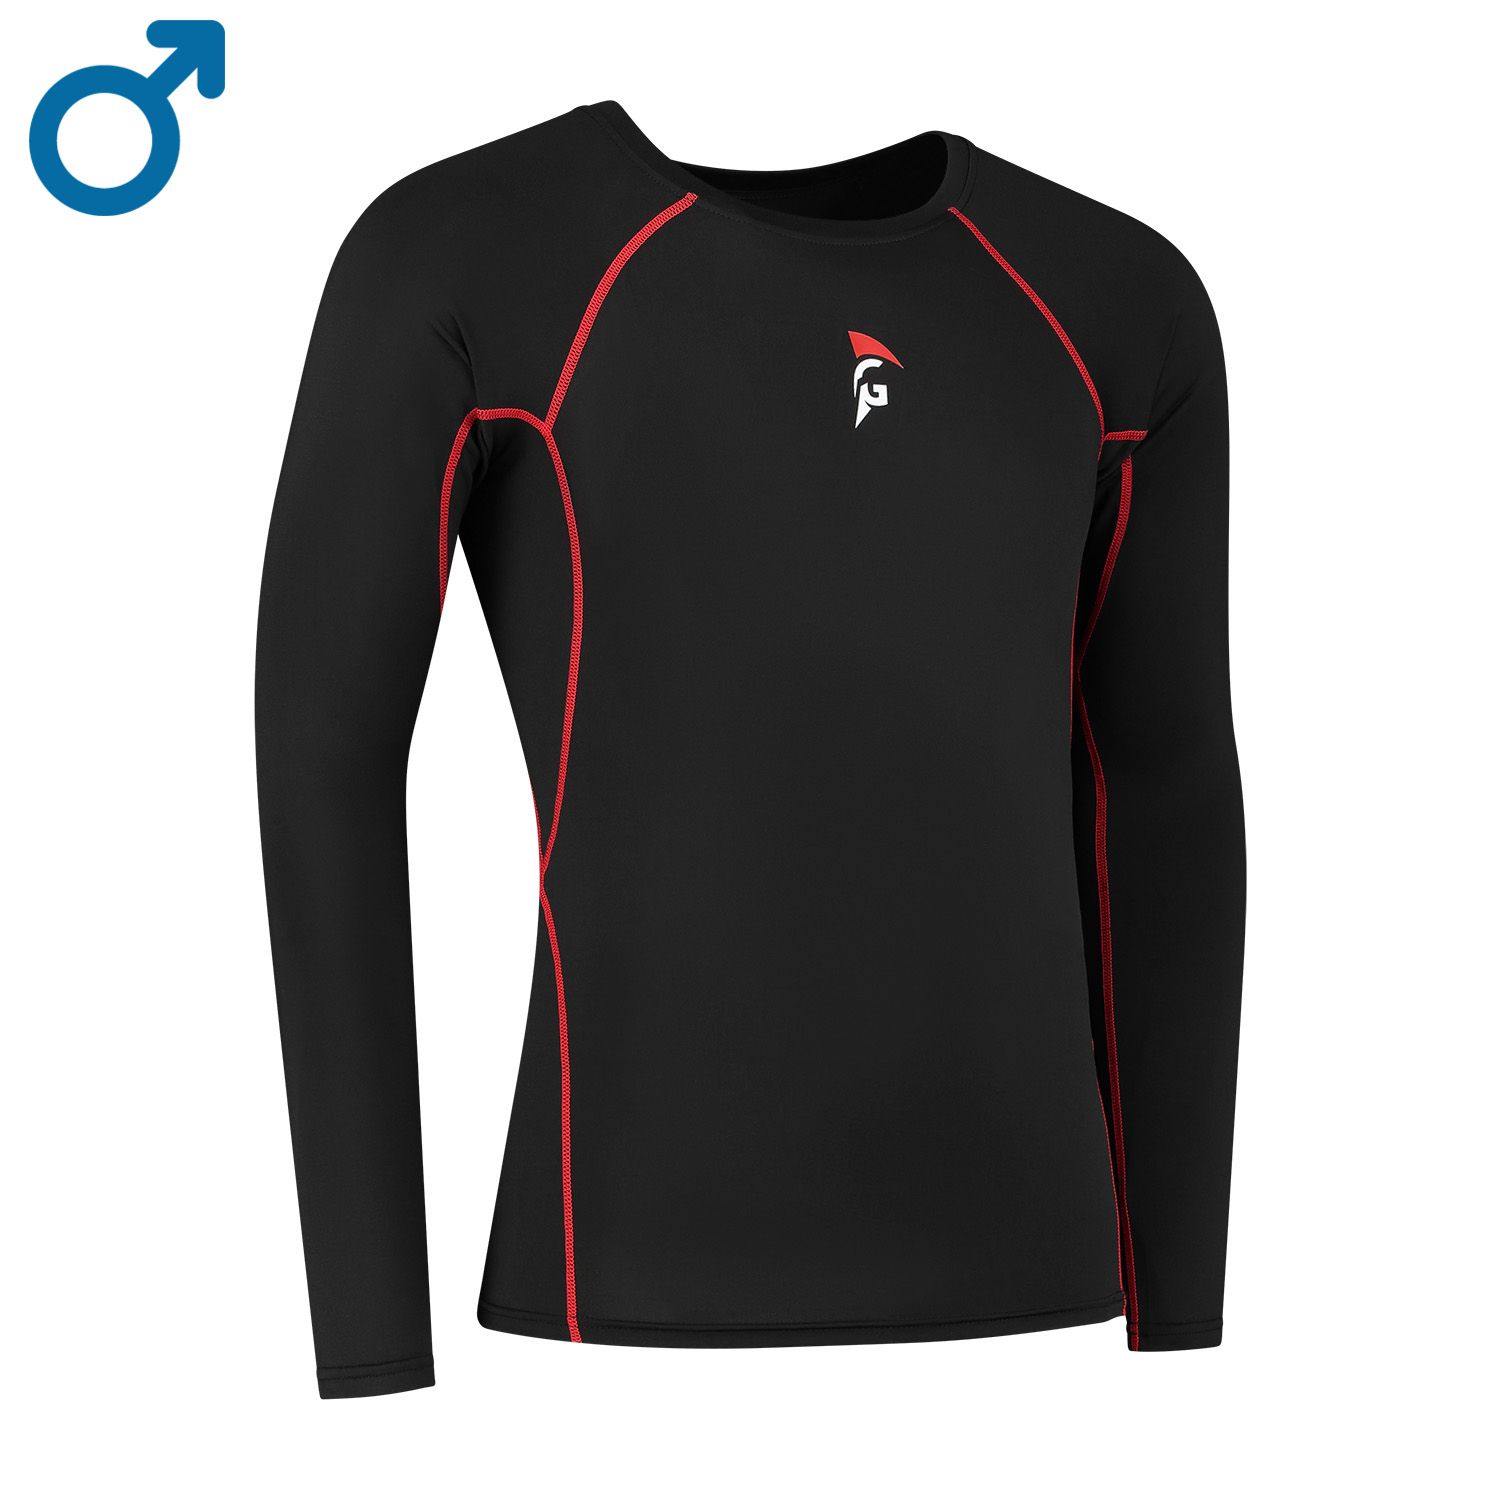 gladiator sports longsleeve compression top men and women